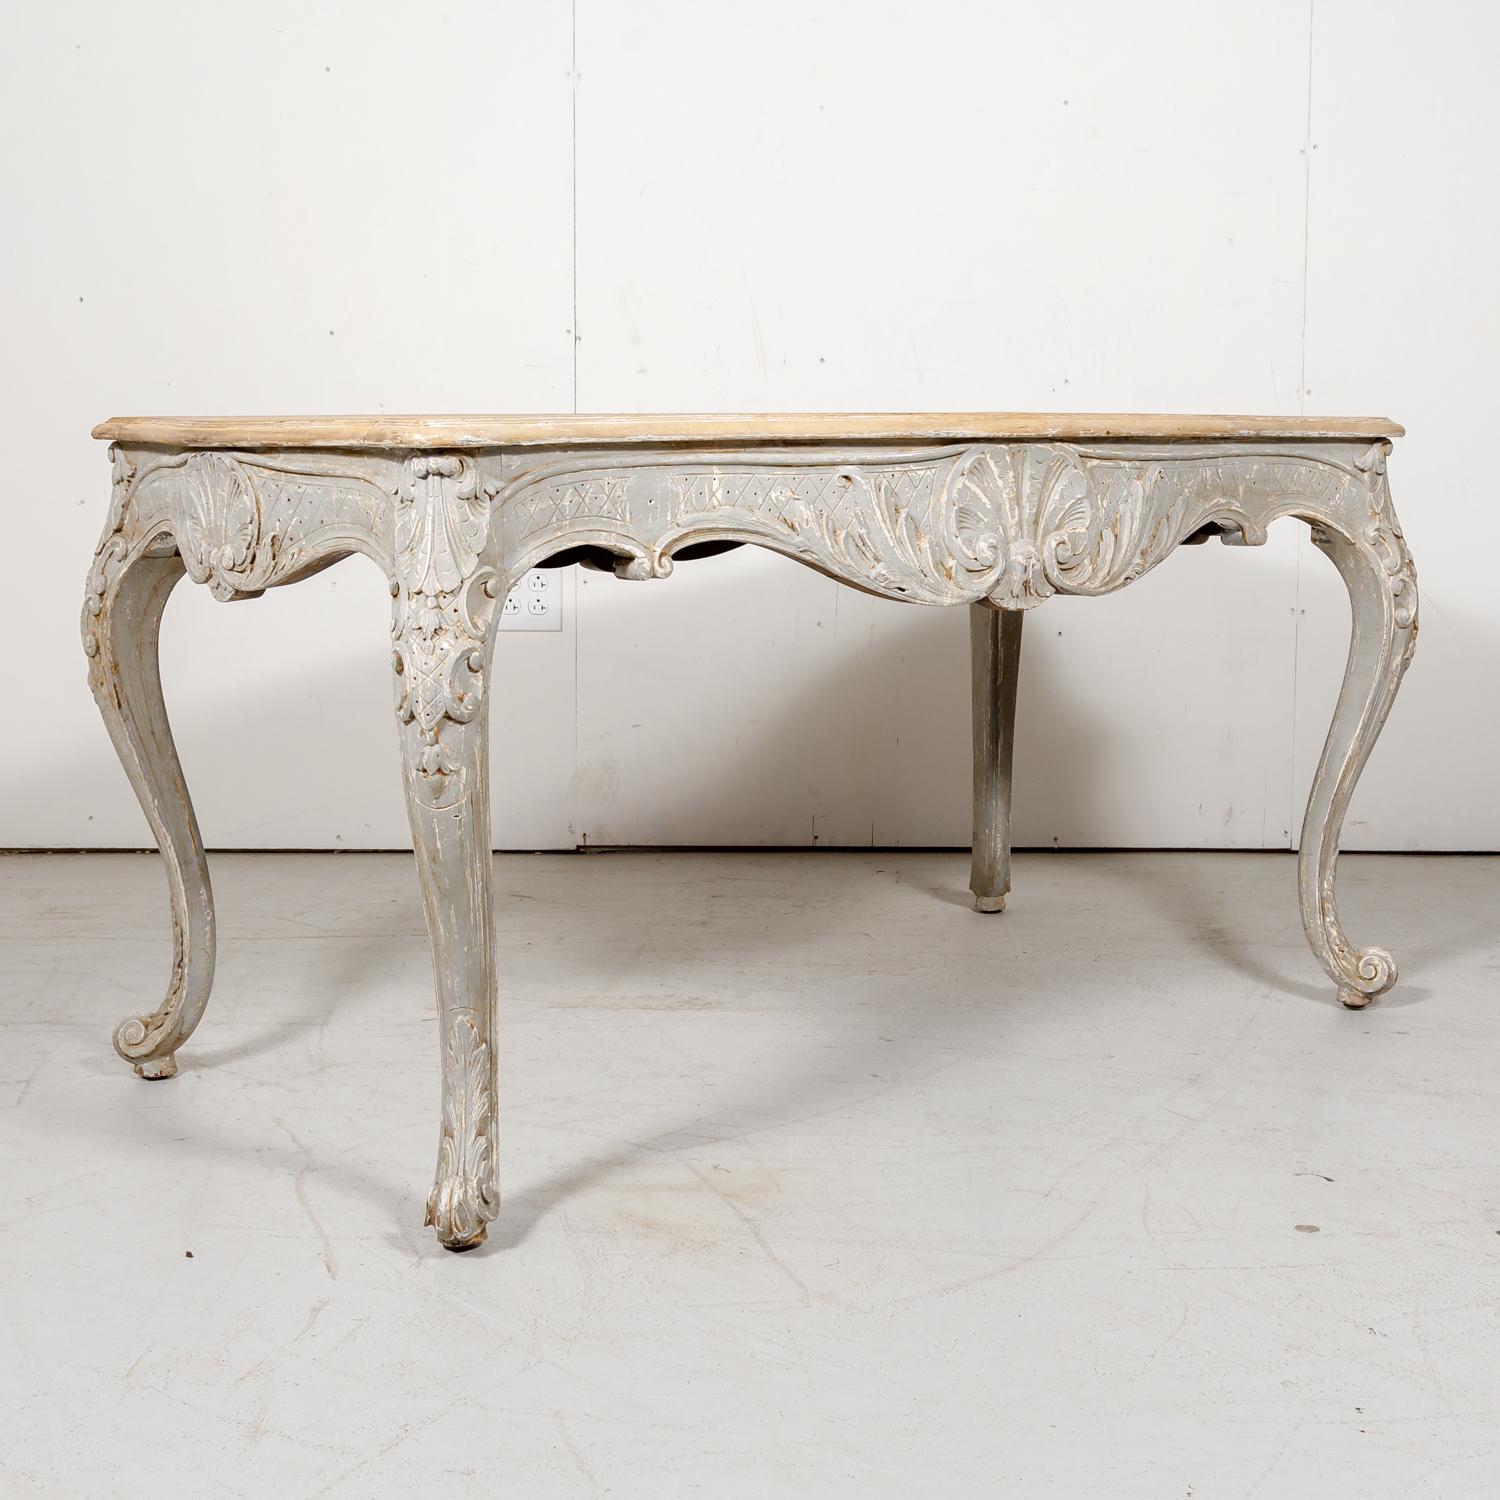 Late 19th Century French Country Louis XV Style Painted Wood Table with Bleached Top